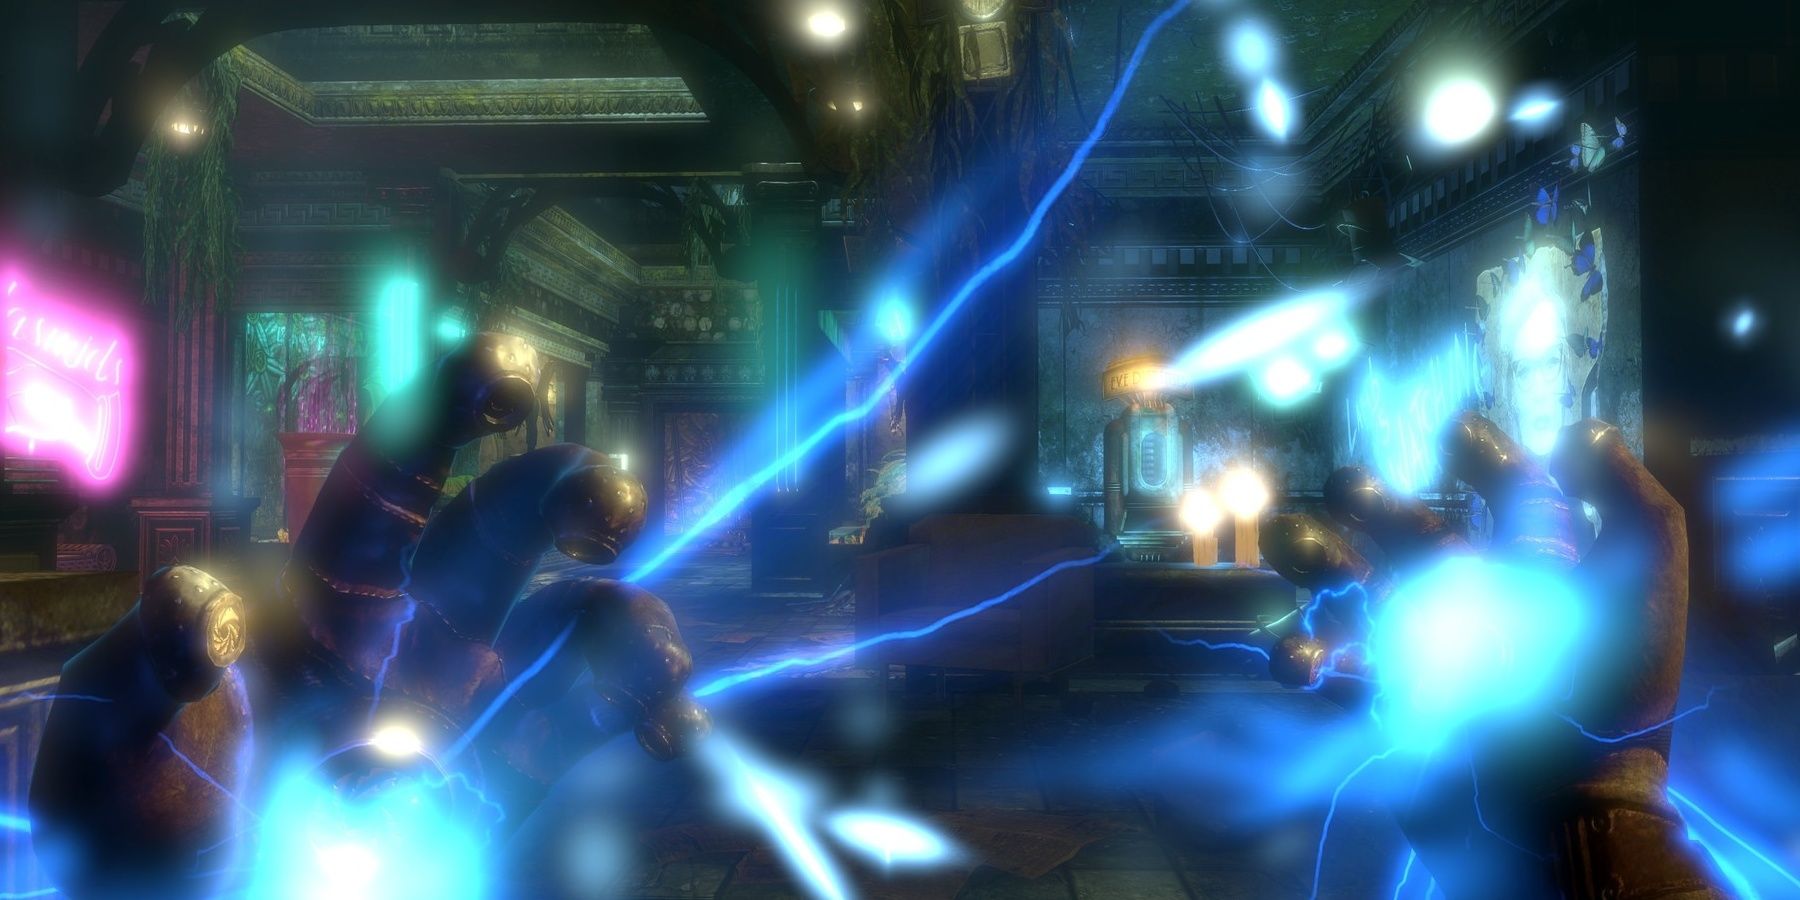 A screenshot showing the player using the Electro Bolt Plasmid in BioShock 2